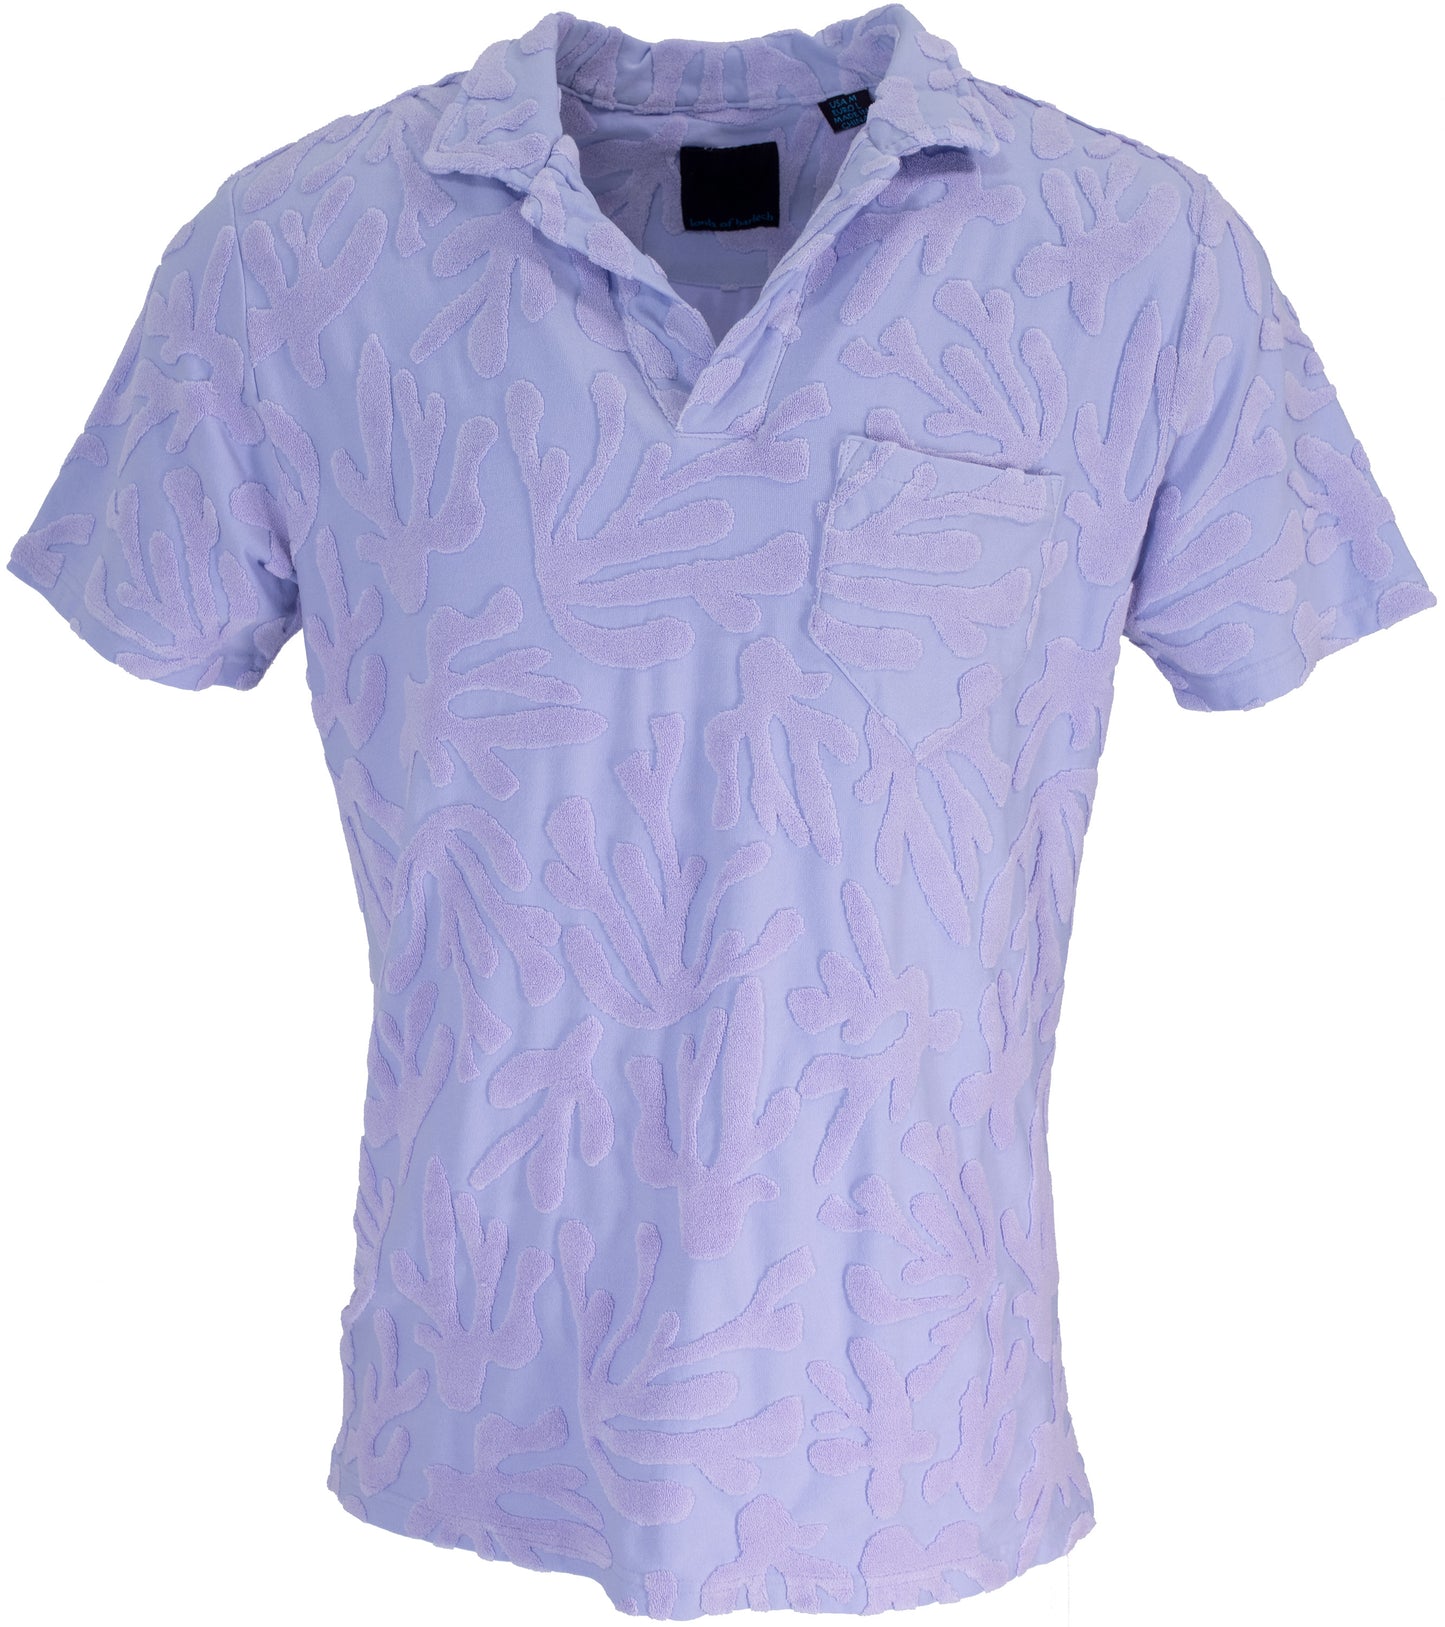 JOHNNY CORAL TOWEL POLO SHIRT IN LAVENDER